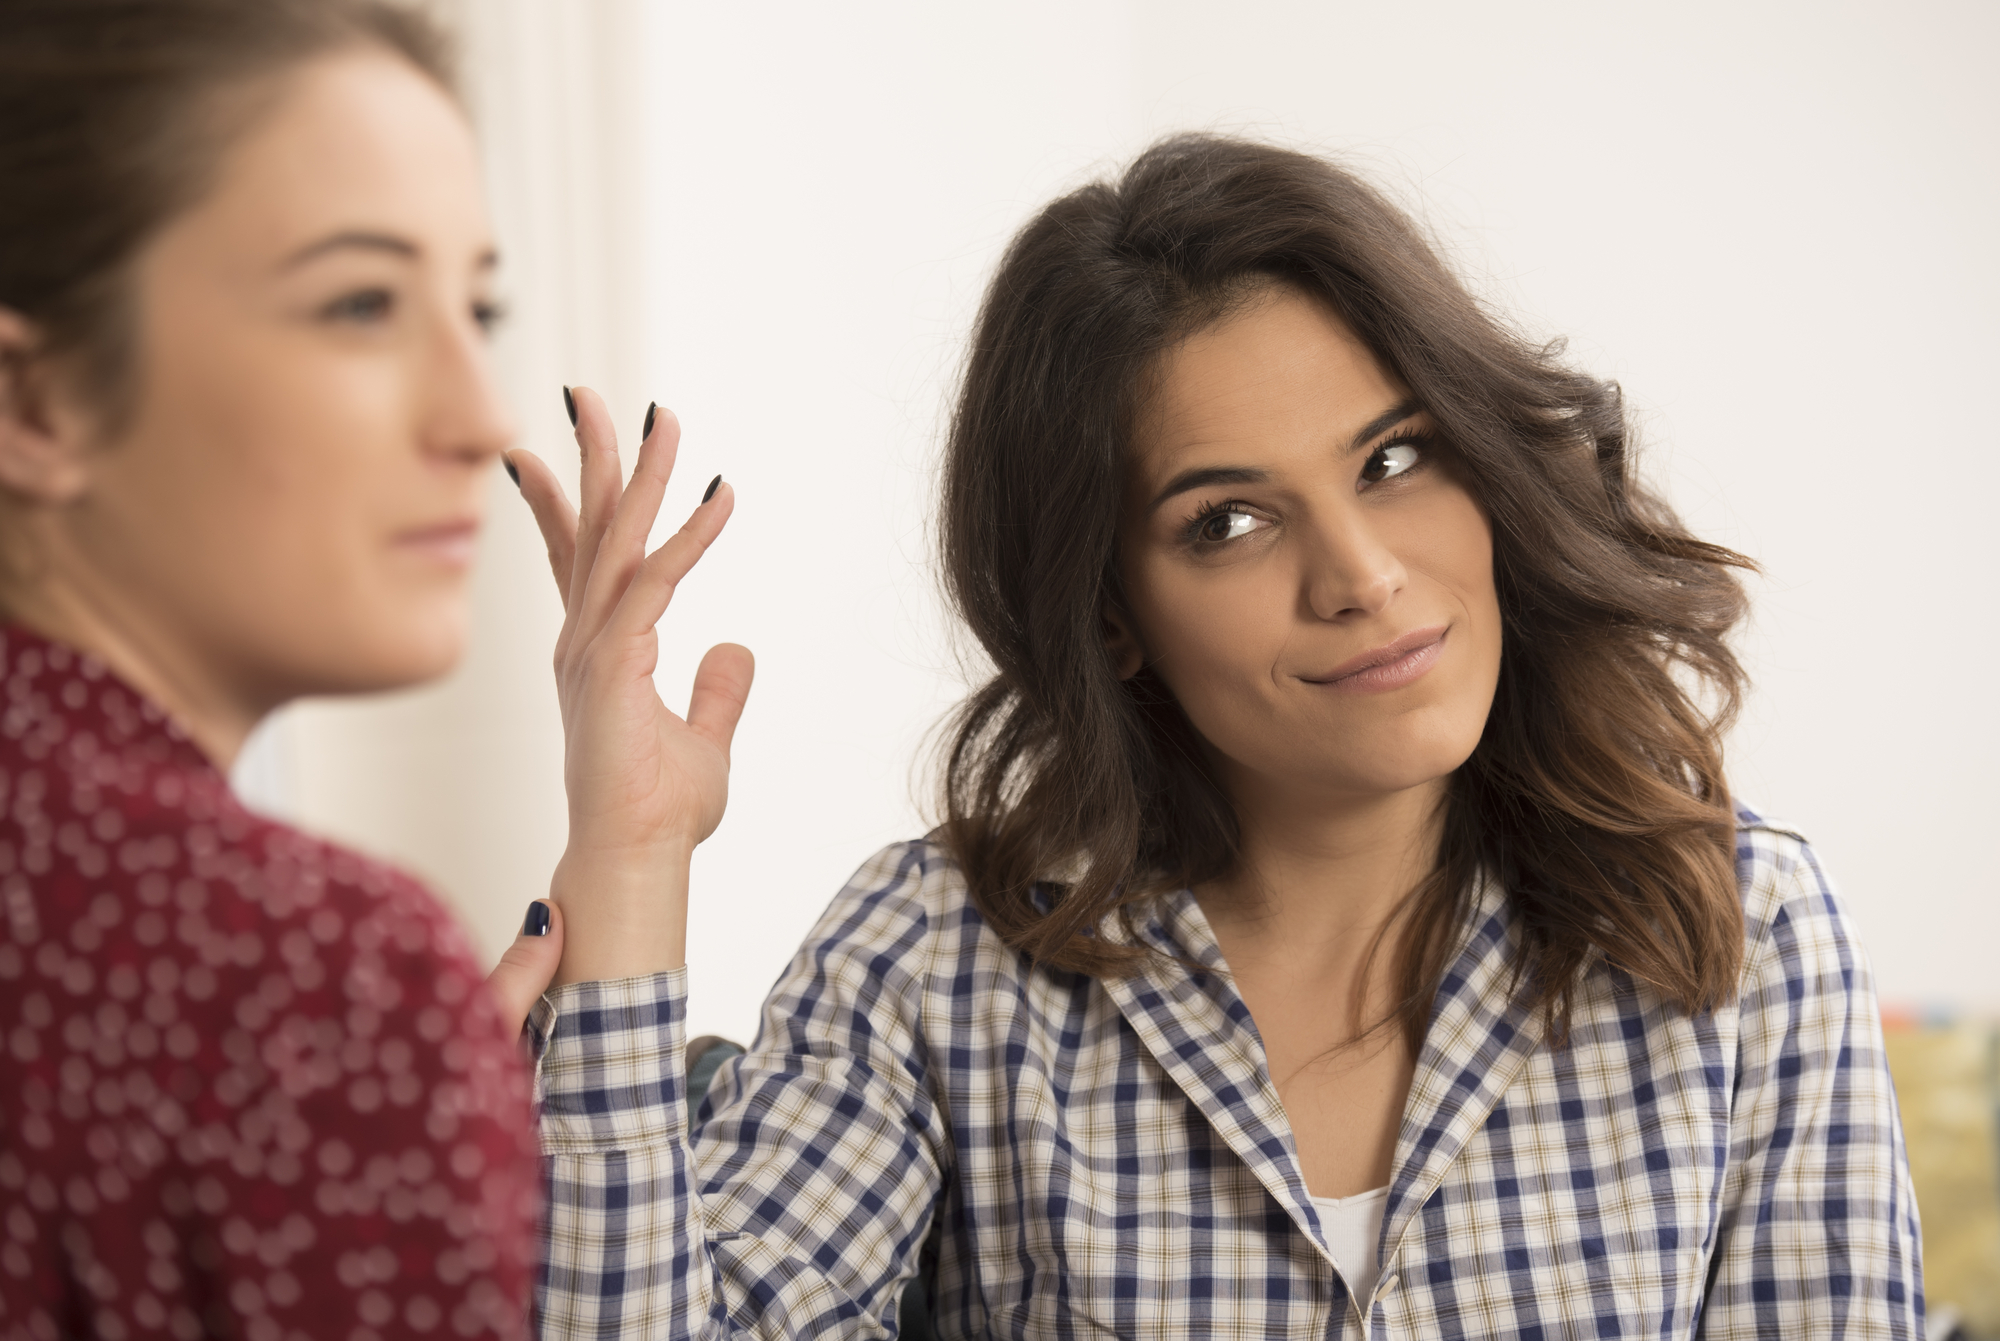 Two women are indoors having a conversation. One woman with brown hair and wearing a red patterned top looks away, while the other woman with wavy hair and wearing a checkered button-up shirt makes a gesture with her hand, appearing a bit skeptical or bemused.